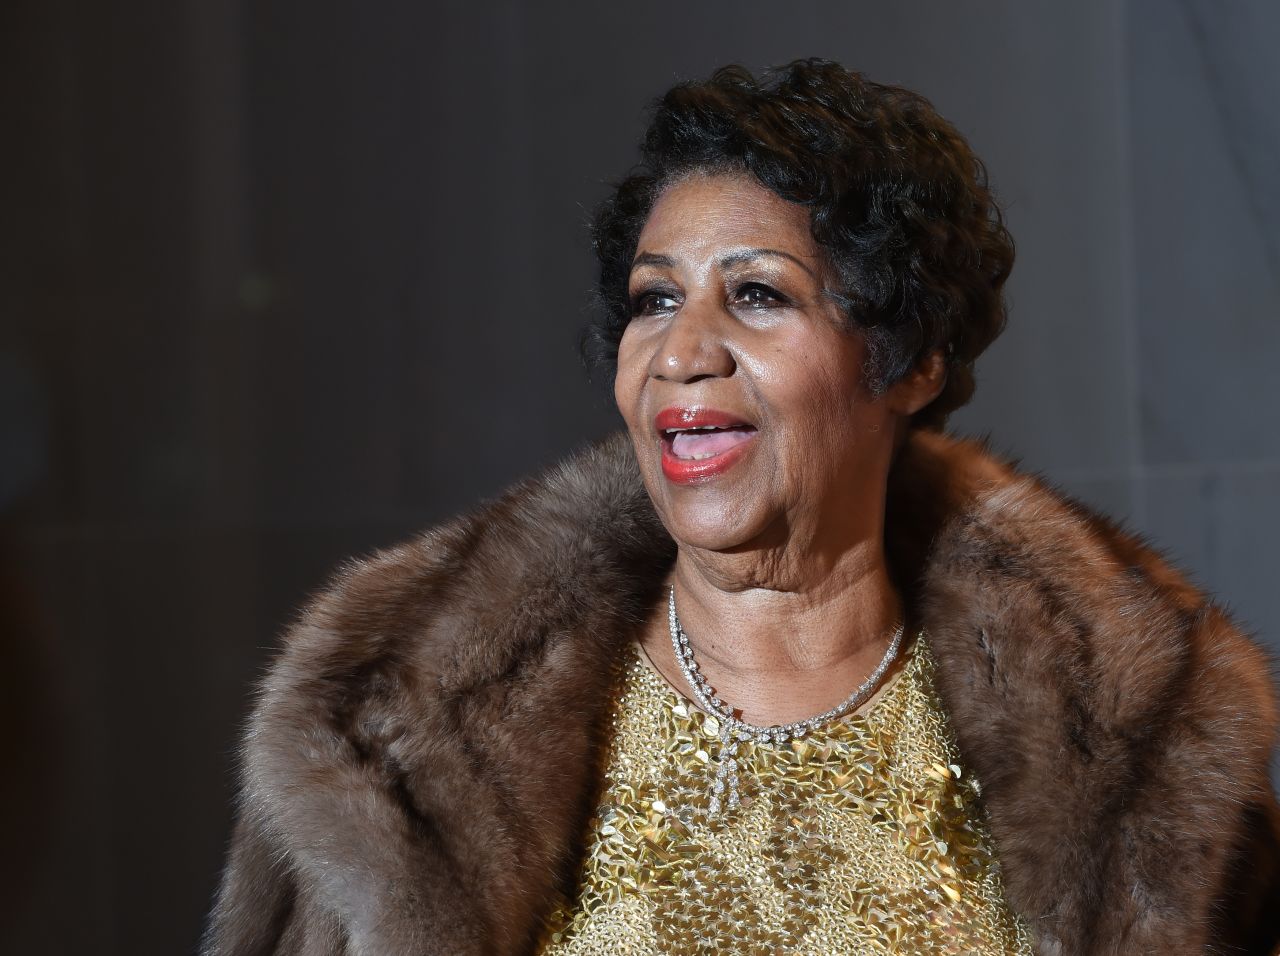 When they're not working their day jobs, many celebrities like to do something else on the side. Sometimes it's a creative outlet; other times, it's a full-fledged business. The Queen of Soul Aretha Franklin <a href="http://www.clickondetroit.com/video/aretha-franklin-to-release-food-products" target="_blank" target="_blank">told Detroit's Channel 4</a> in January that she was working on launching a food line that would include desserts and her special brand of chili and gumbo.